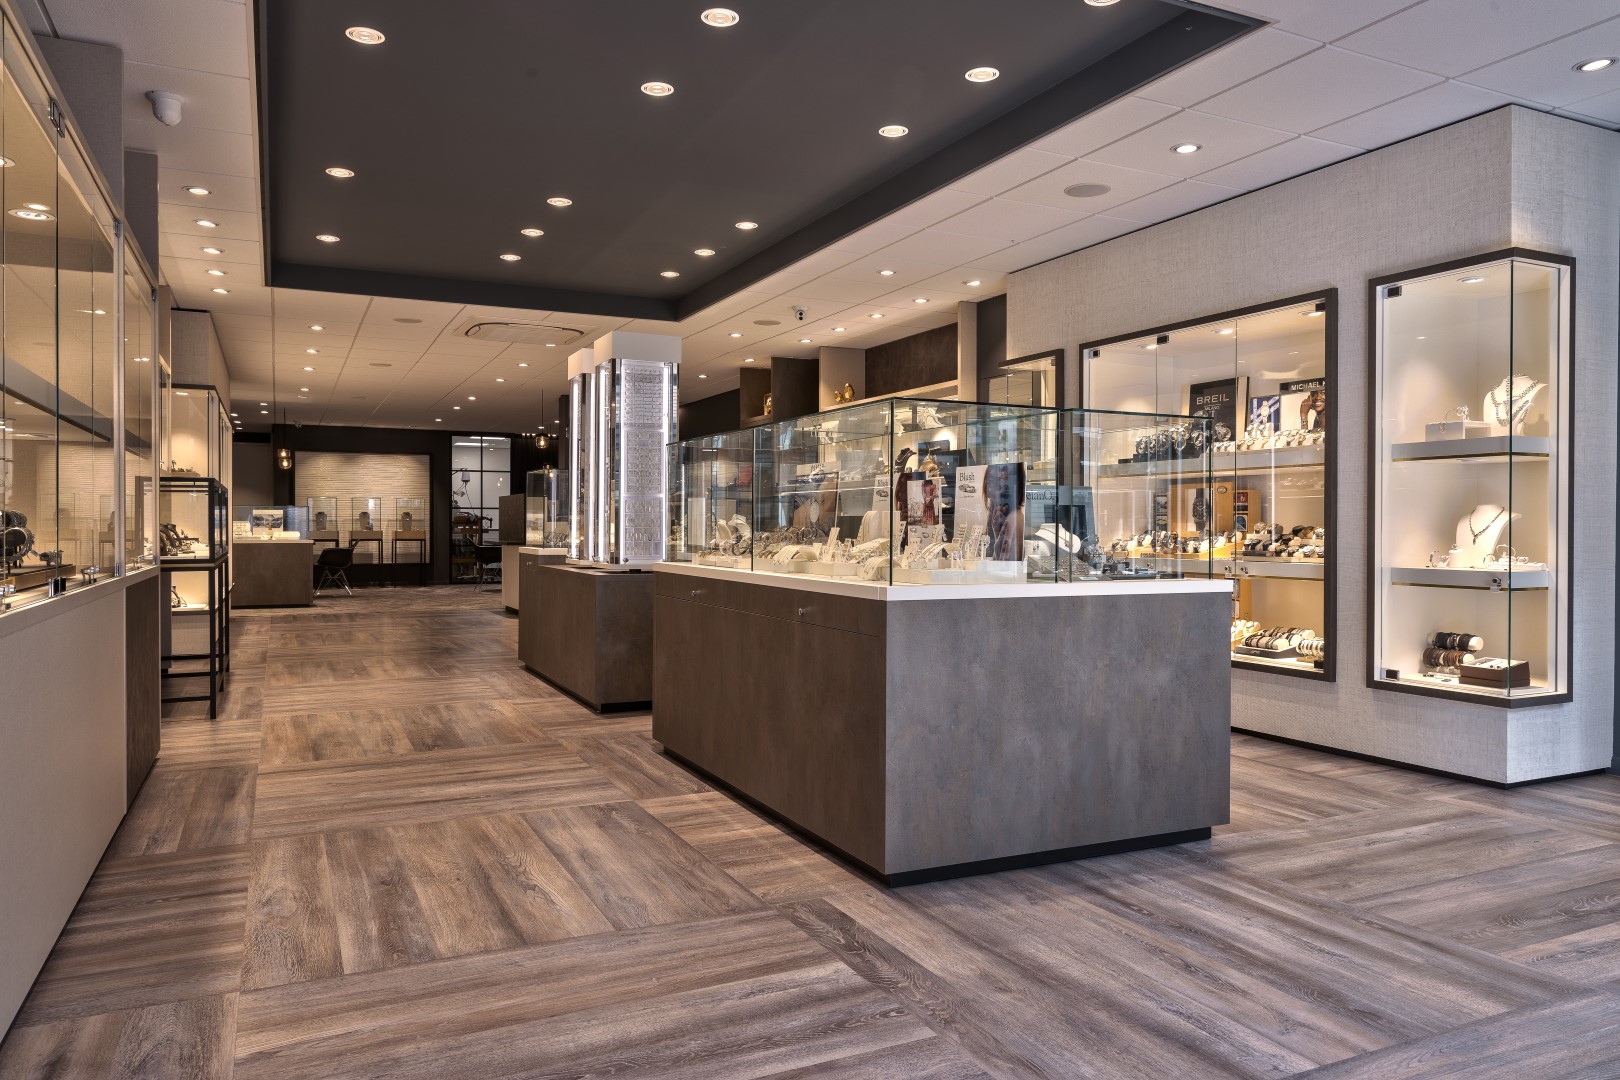 Shop design for a jewelry store in Harderwijk with wooden floor and many display cases.